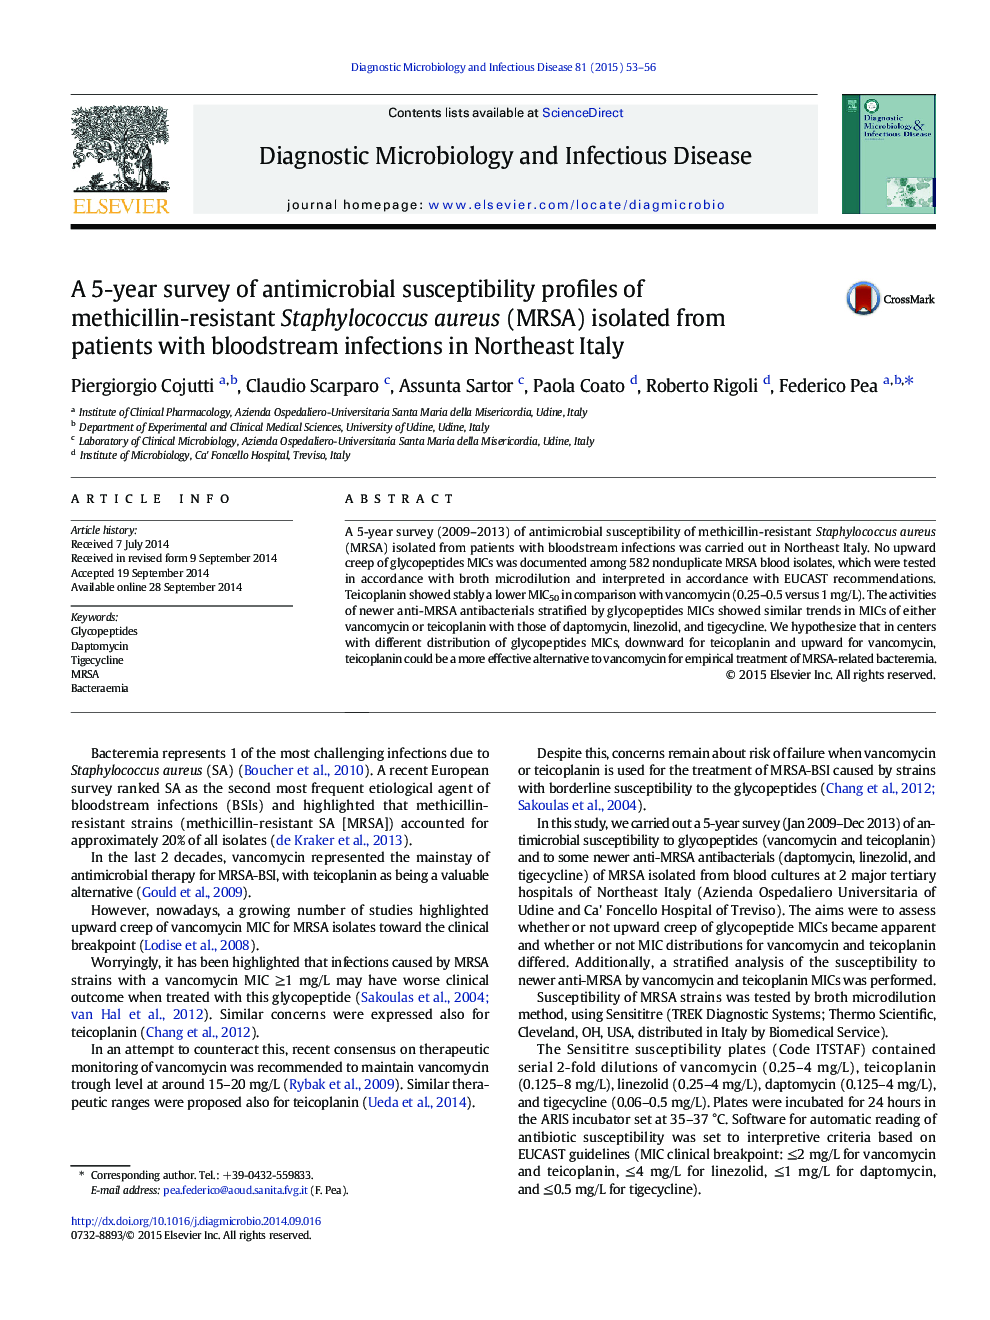 A 5-year survey of antimicrobial susceptibility profiles of methicillin-resistant Staphylococcus aureus (MRSA) isolated from patients with bloodstream infections in Northeast Italy